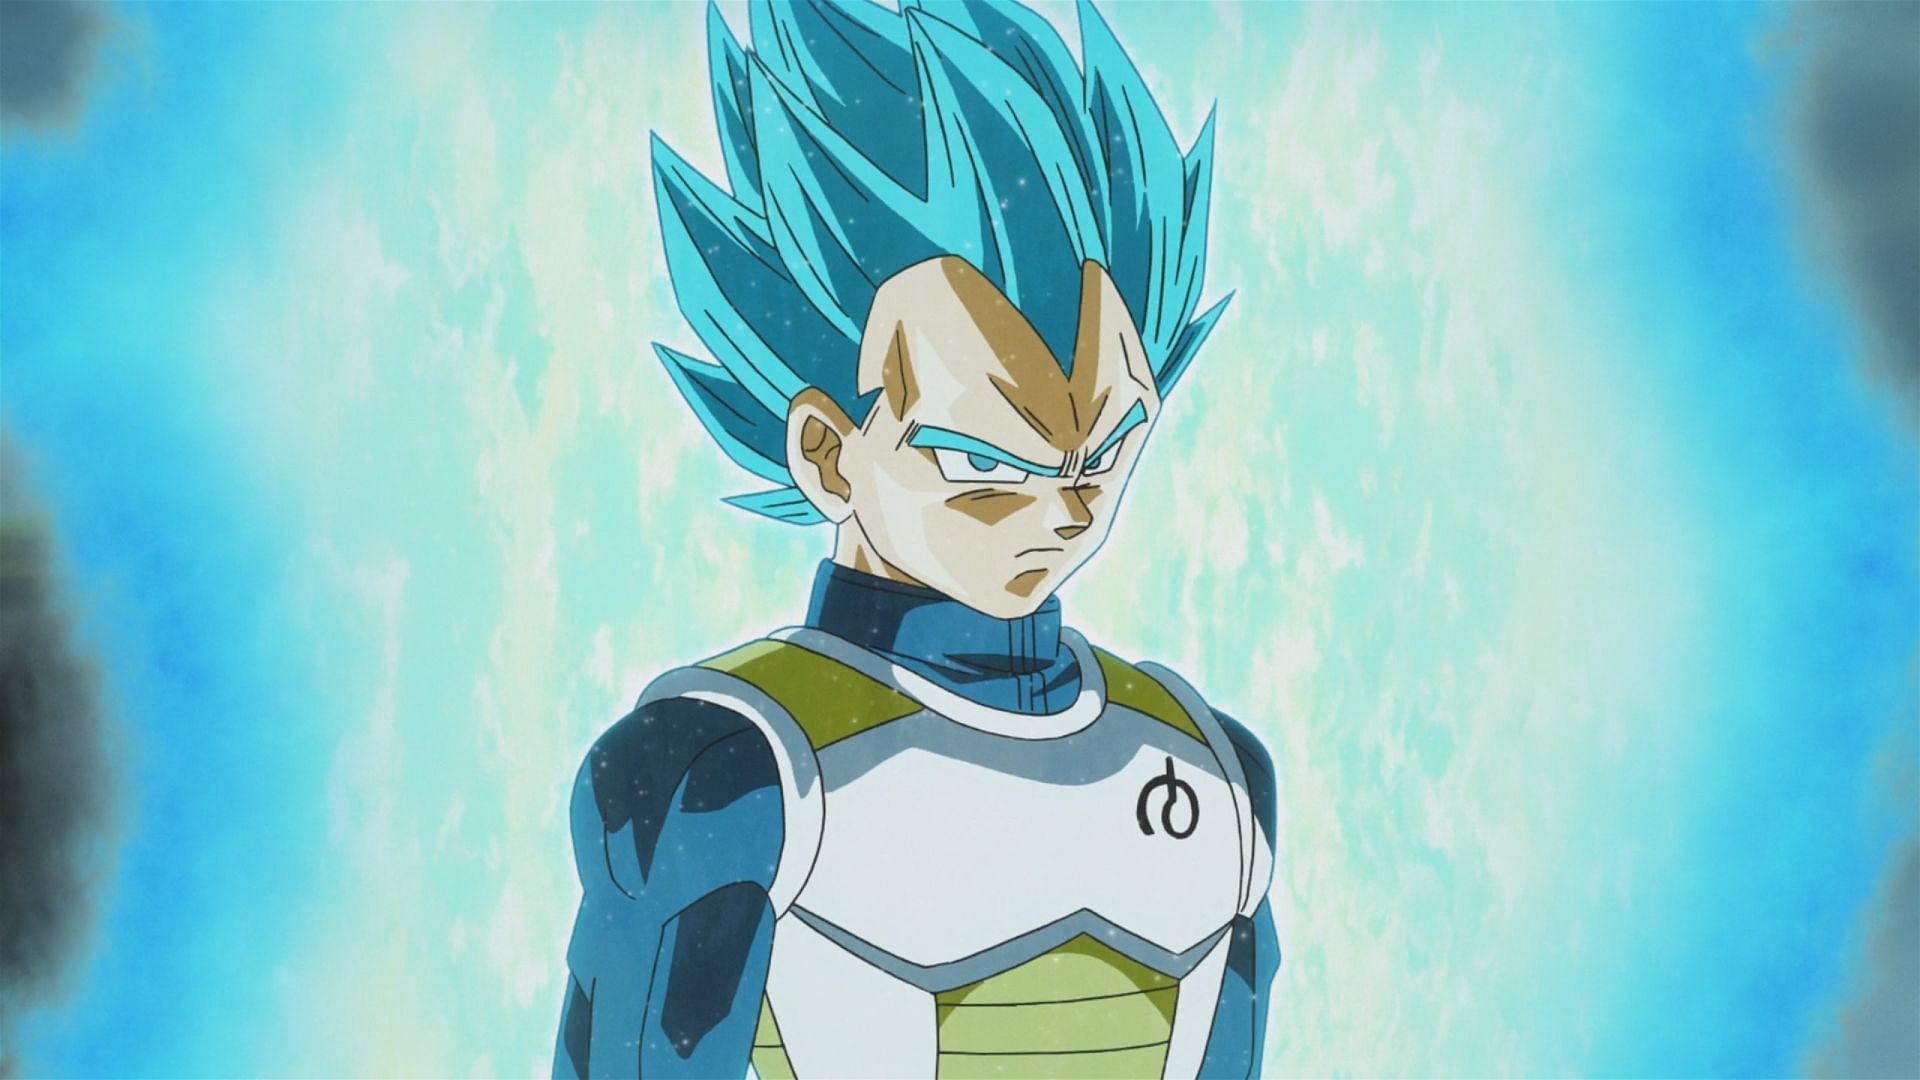 Vegeta as seen in the show (Image via Toei Animation)